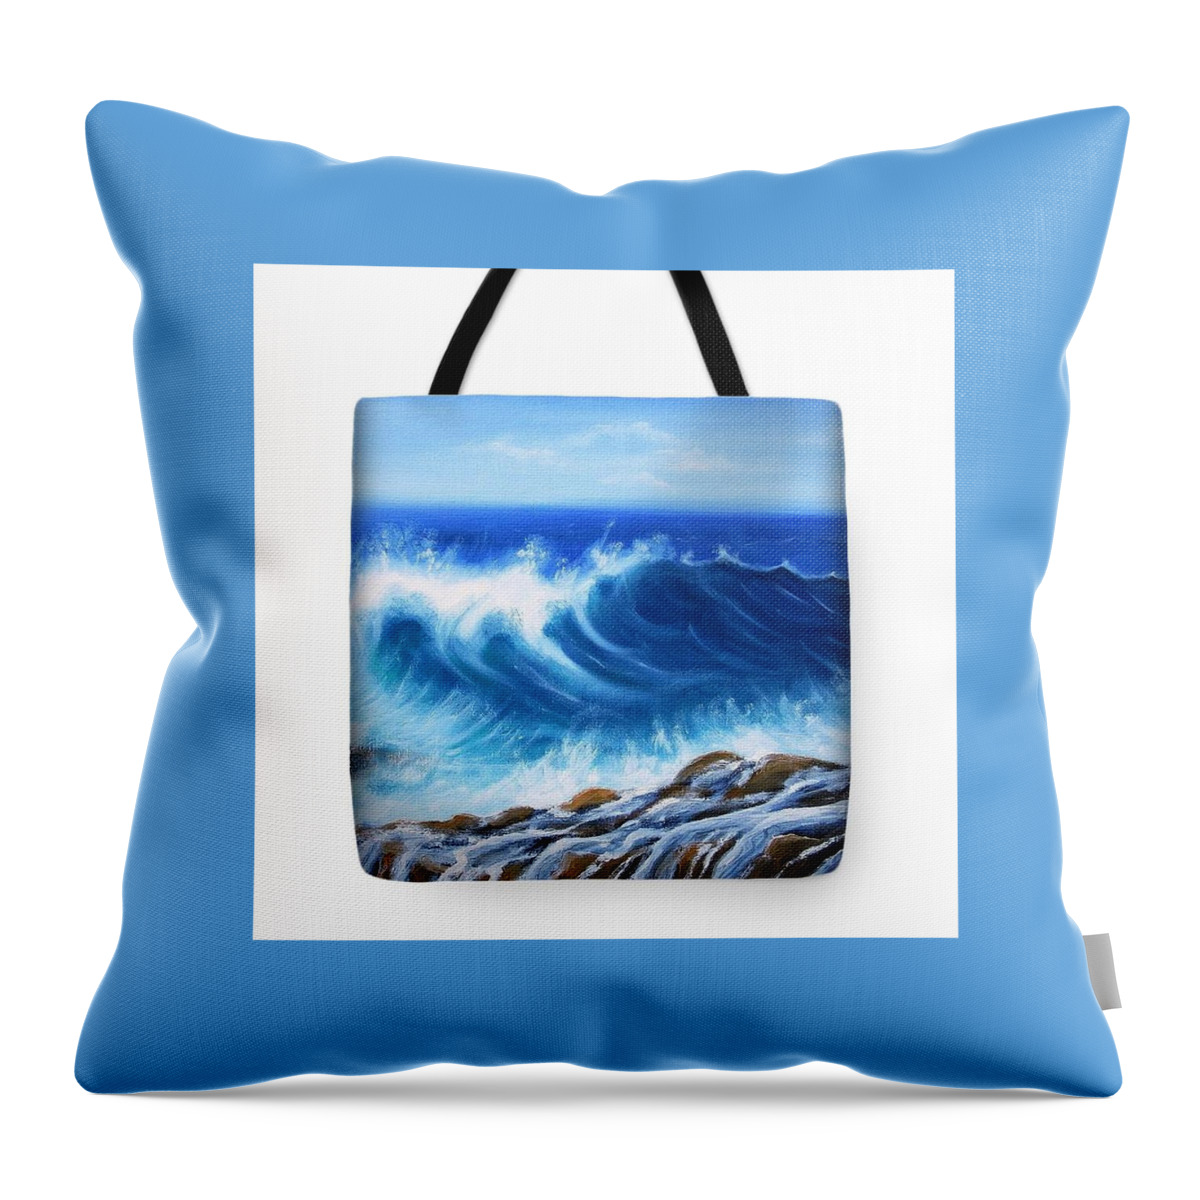 Tote Bag Throw Pillow featuring the painting Tote bag, Wave by Vesna Martinjak